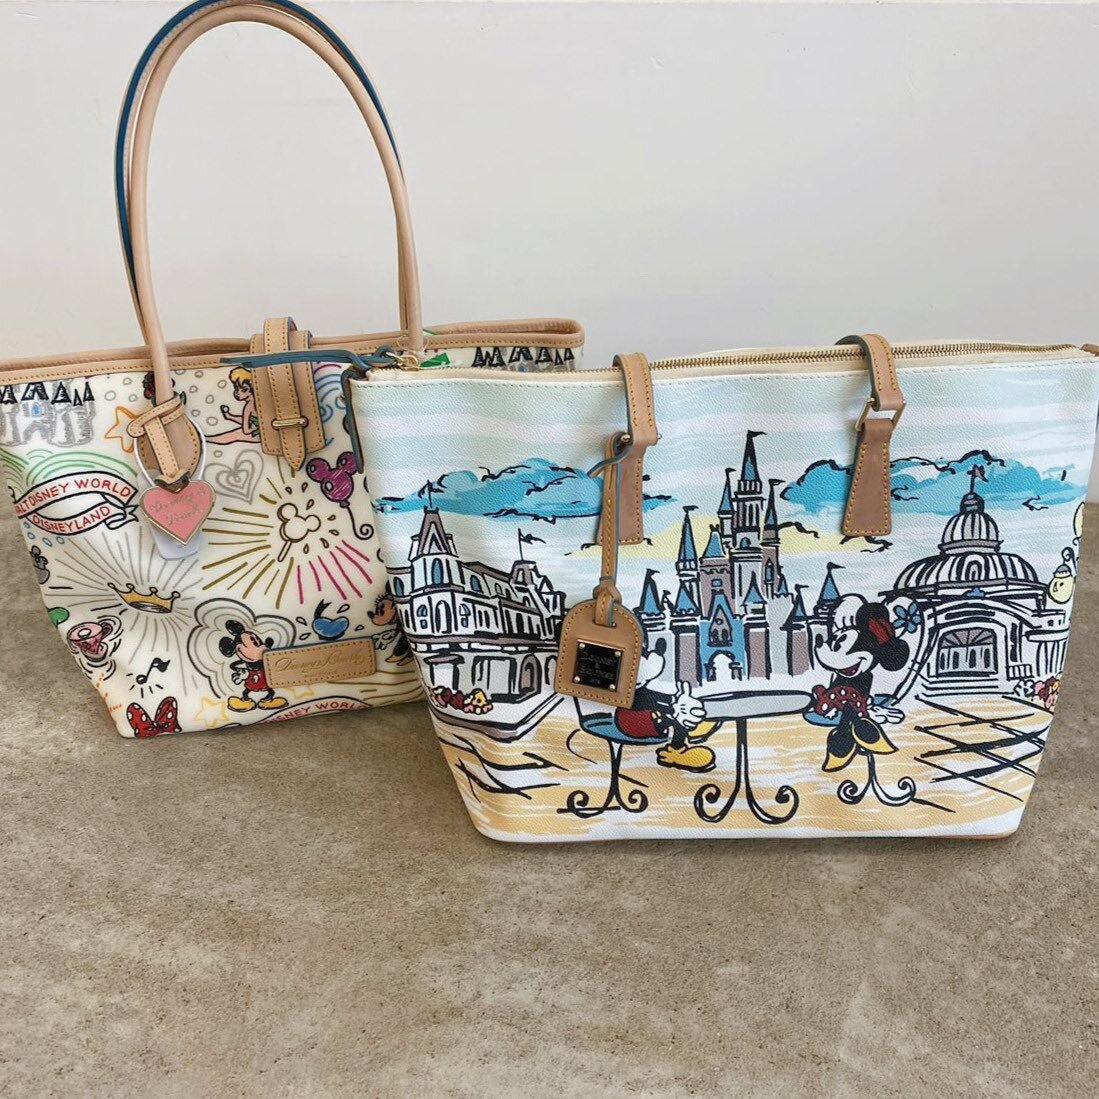 Great selection of @dooneyandbourke in store at PX Alcoa! Give us a call at 865-233-0306 for availability and details 👜✨ 
.
.
.
#dooneyandbourke #newitemsdaily #alcoatn #maryvilletn #buyselltrade #planetxchange